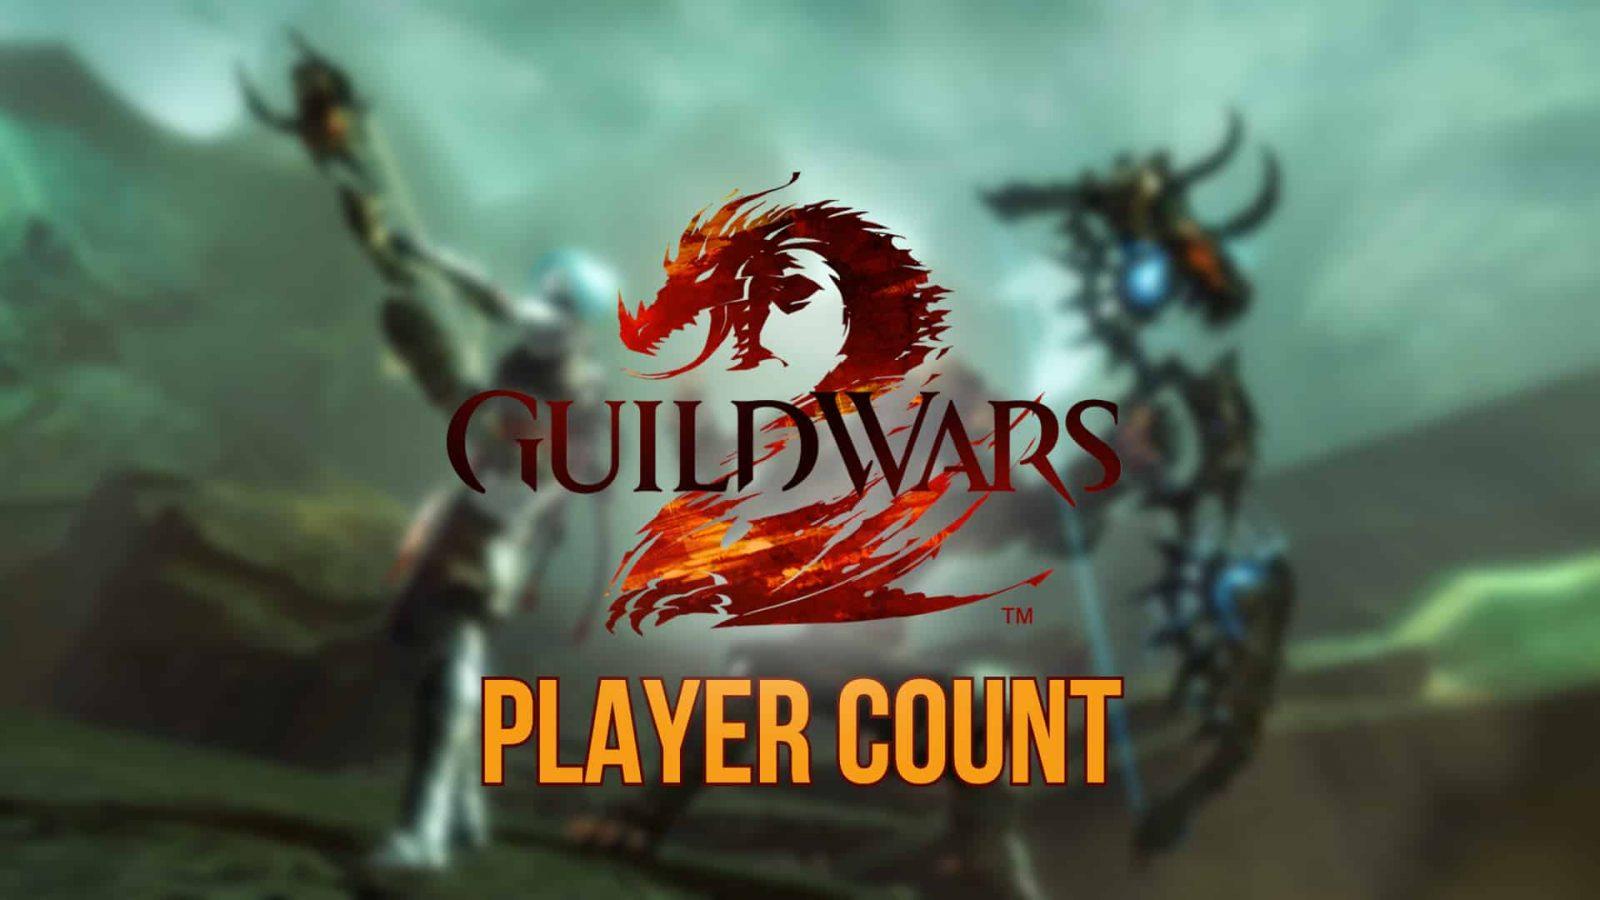 The Guild wars 2 logo on a background with the words player count